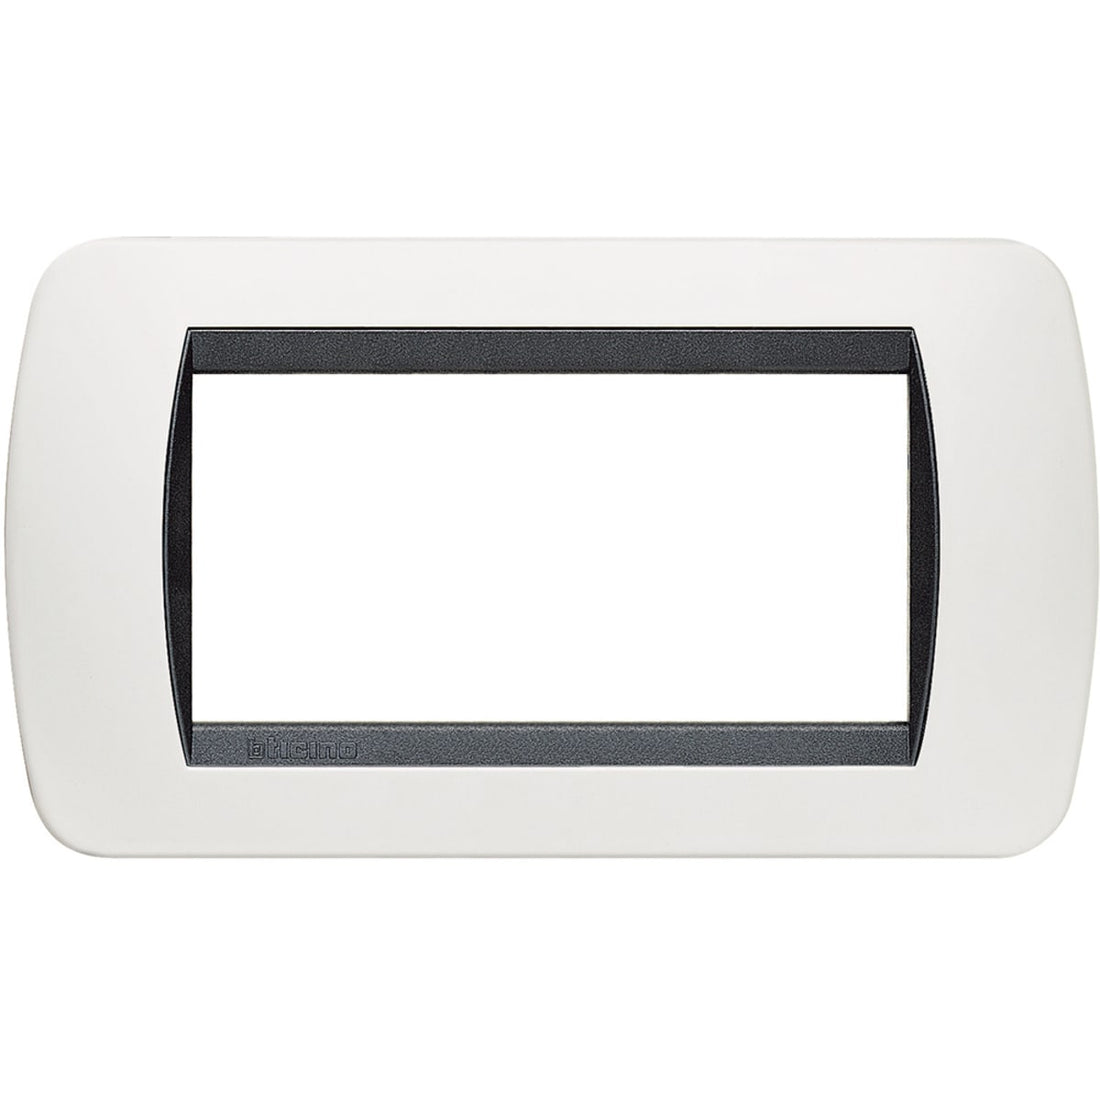 PLATE LIVING INTERNATIONAL 4 PLACES WHITE